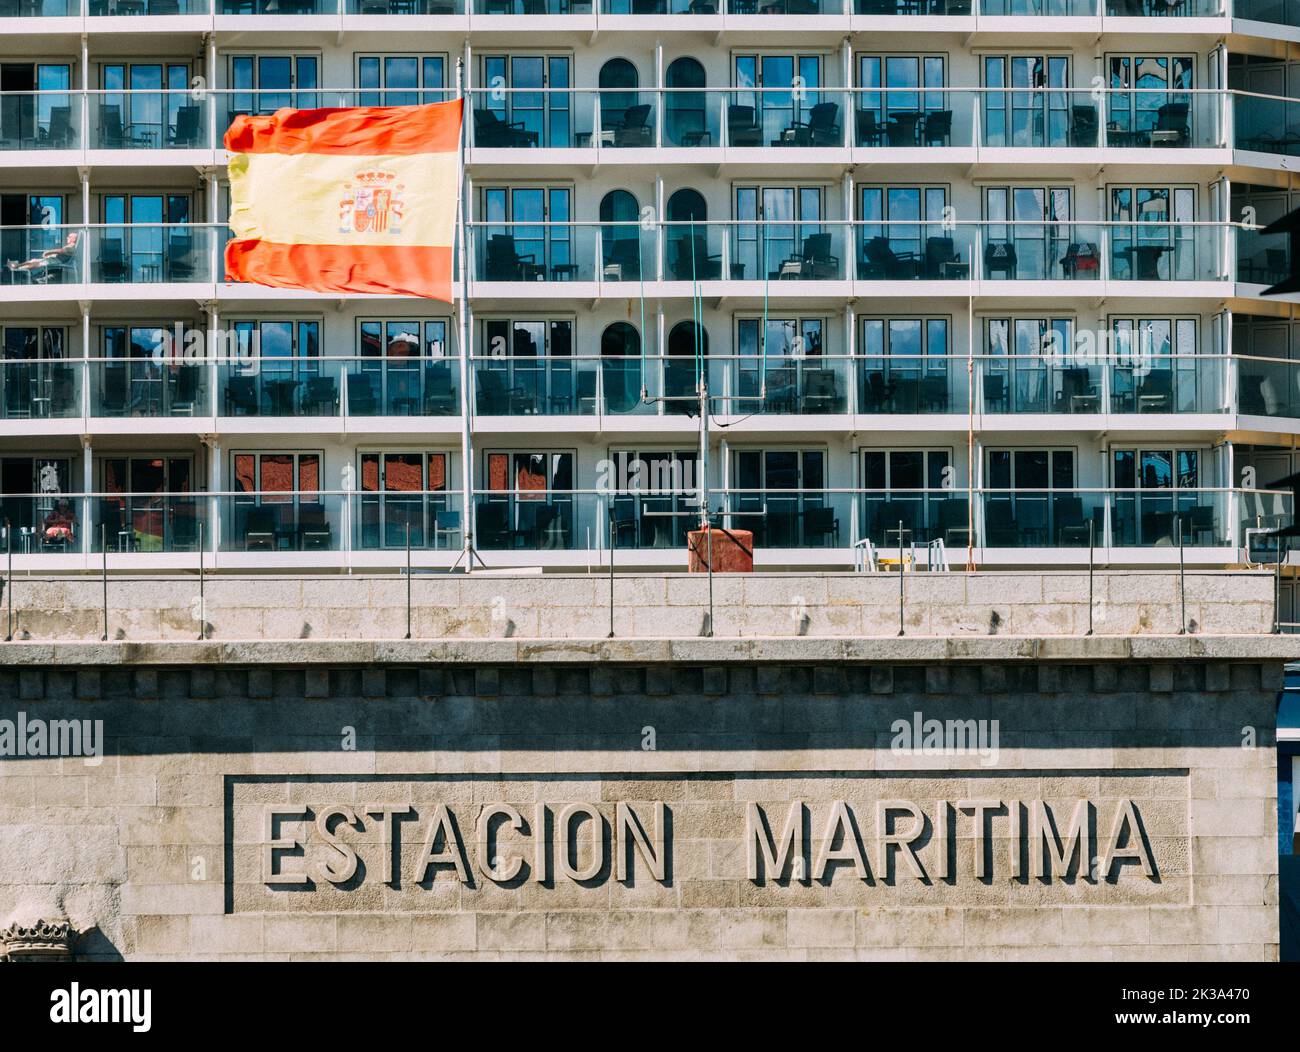 Vigo, Spain - September 25, 2022: View of sign to maritime station with pattern of cabins from a cruise ship next to a Spanish flag Stock Photo